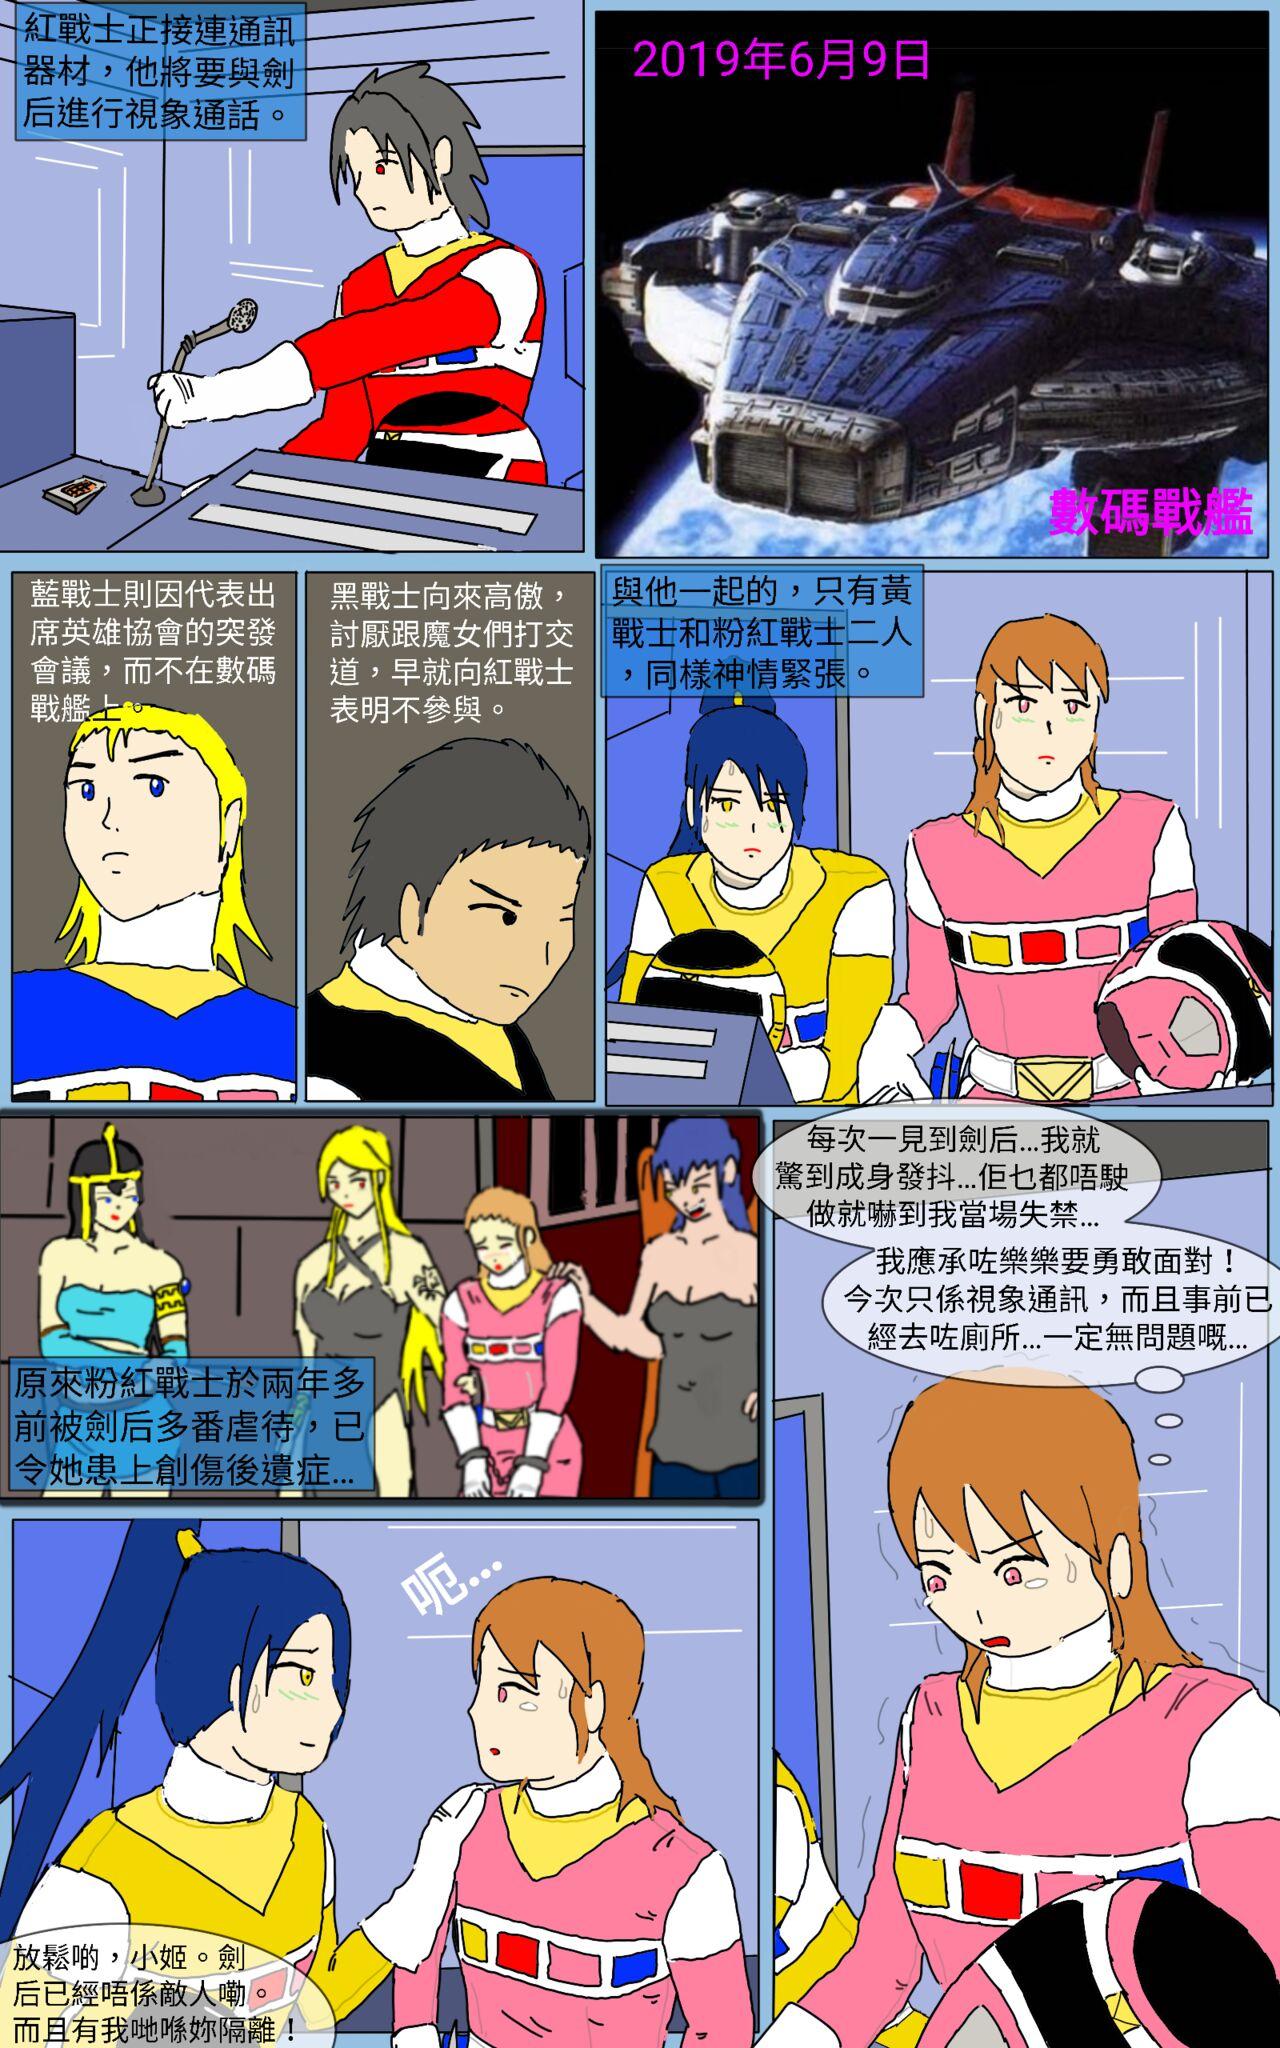 Monster Mission 16 - Super sentai Gay Bus - Page 1